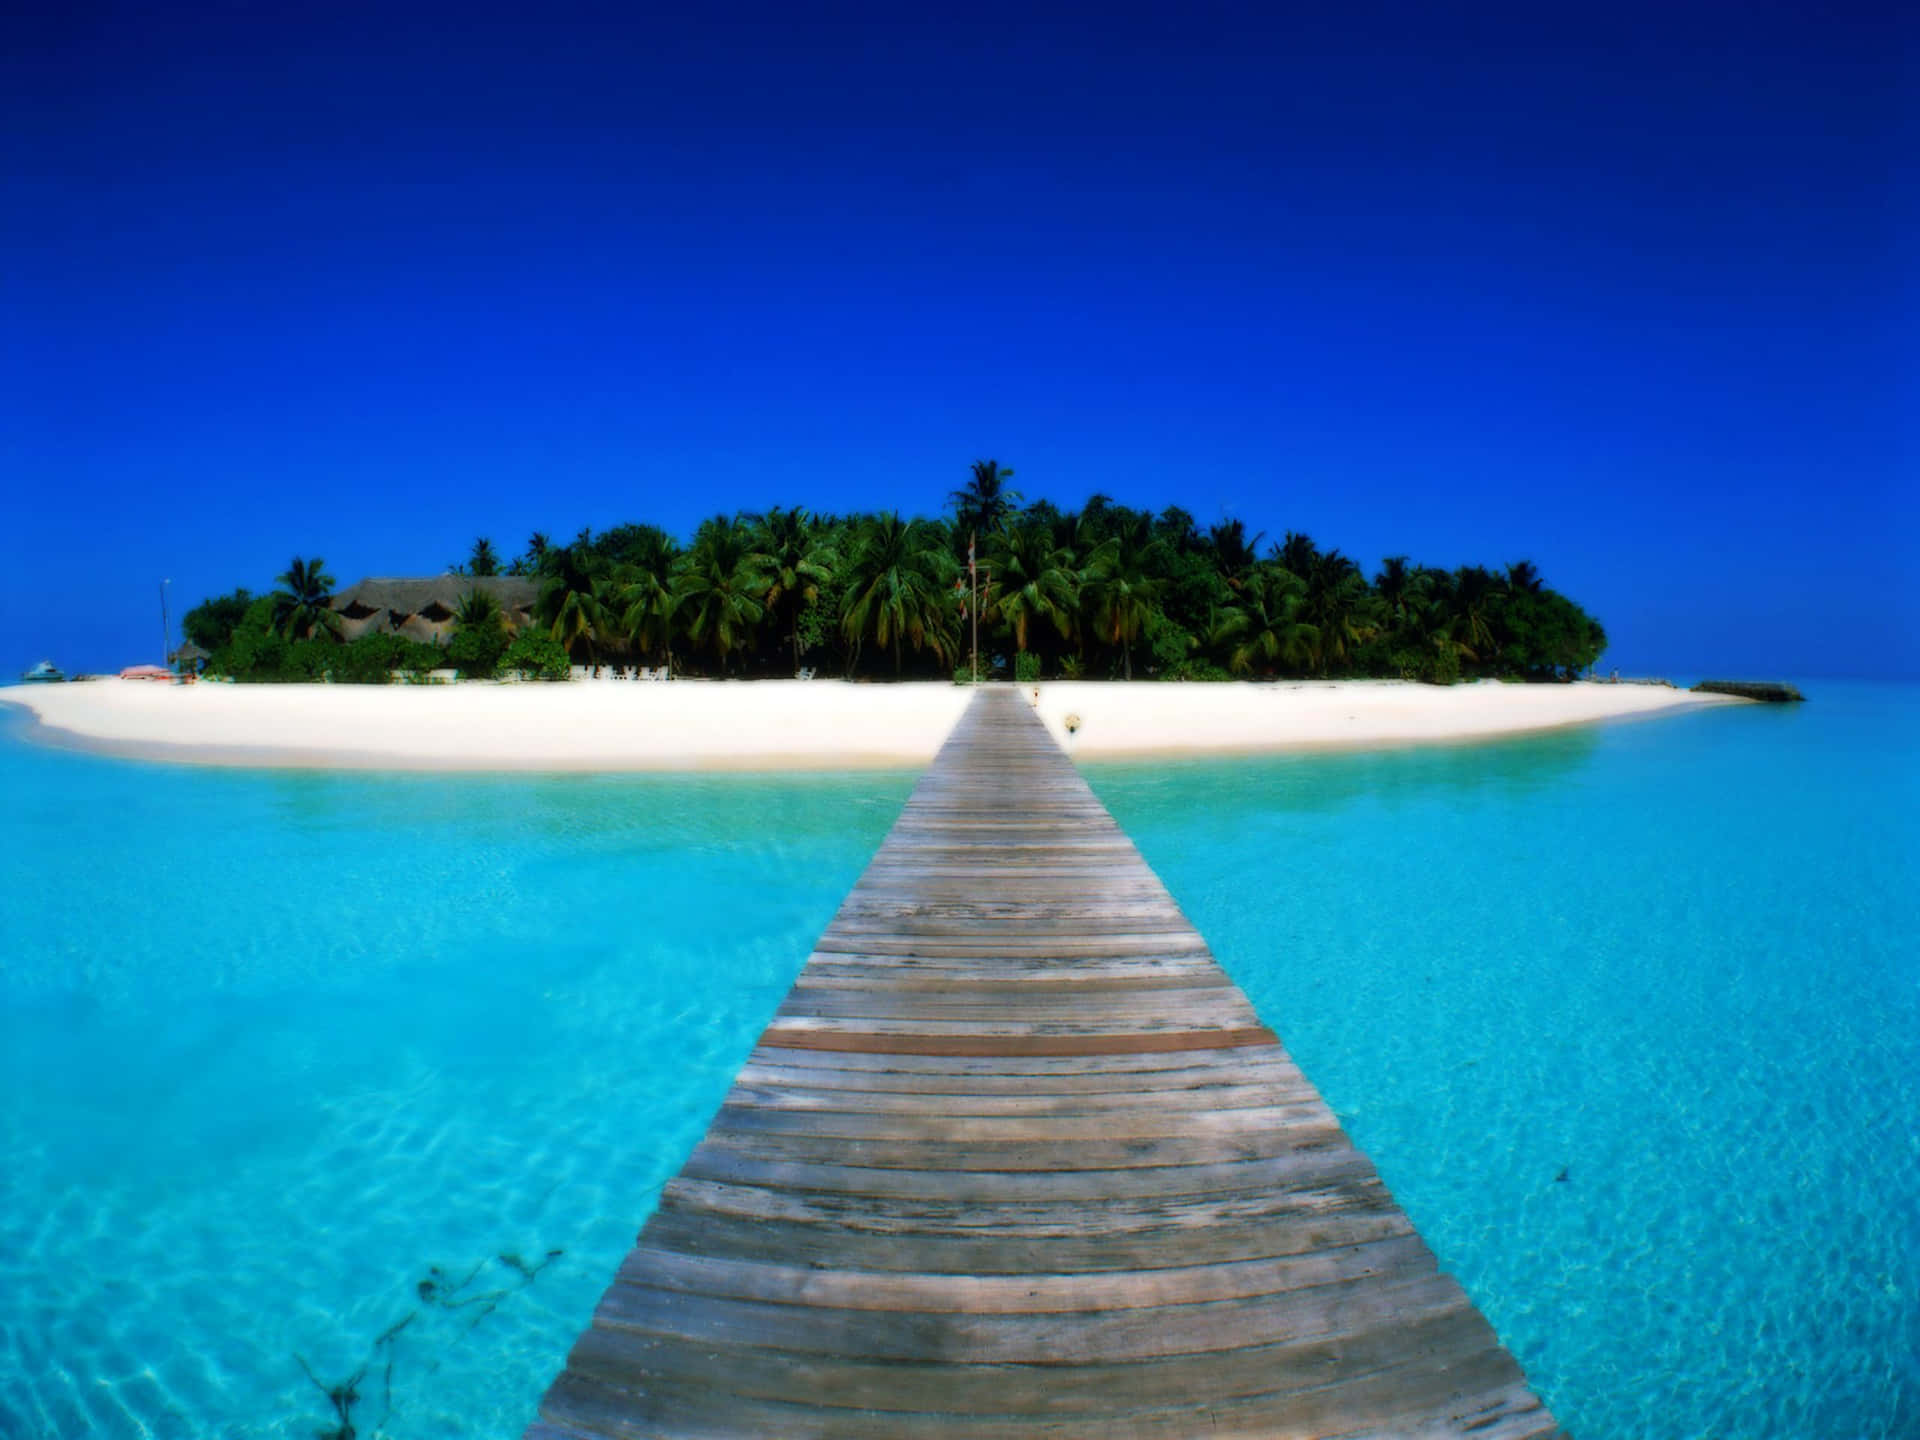 A Wooden Walkway Leading To An Island In The Middle Of The Ocean